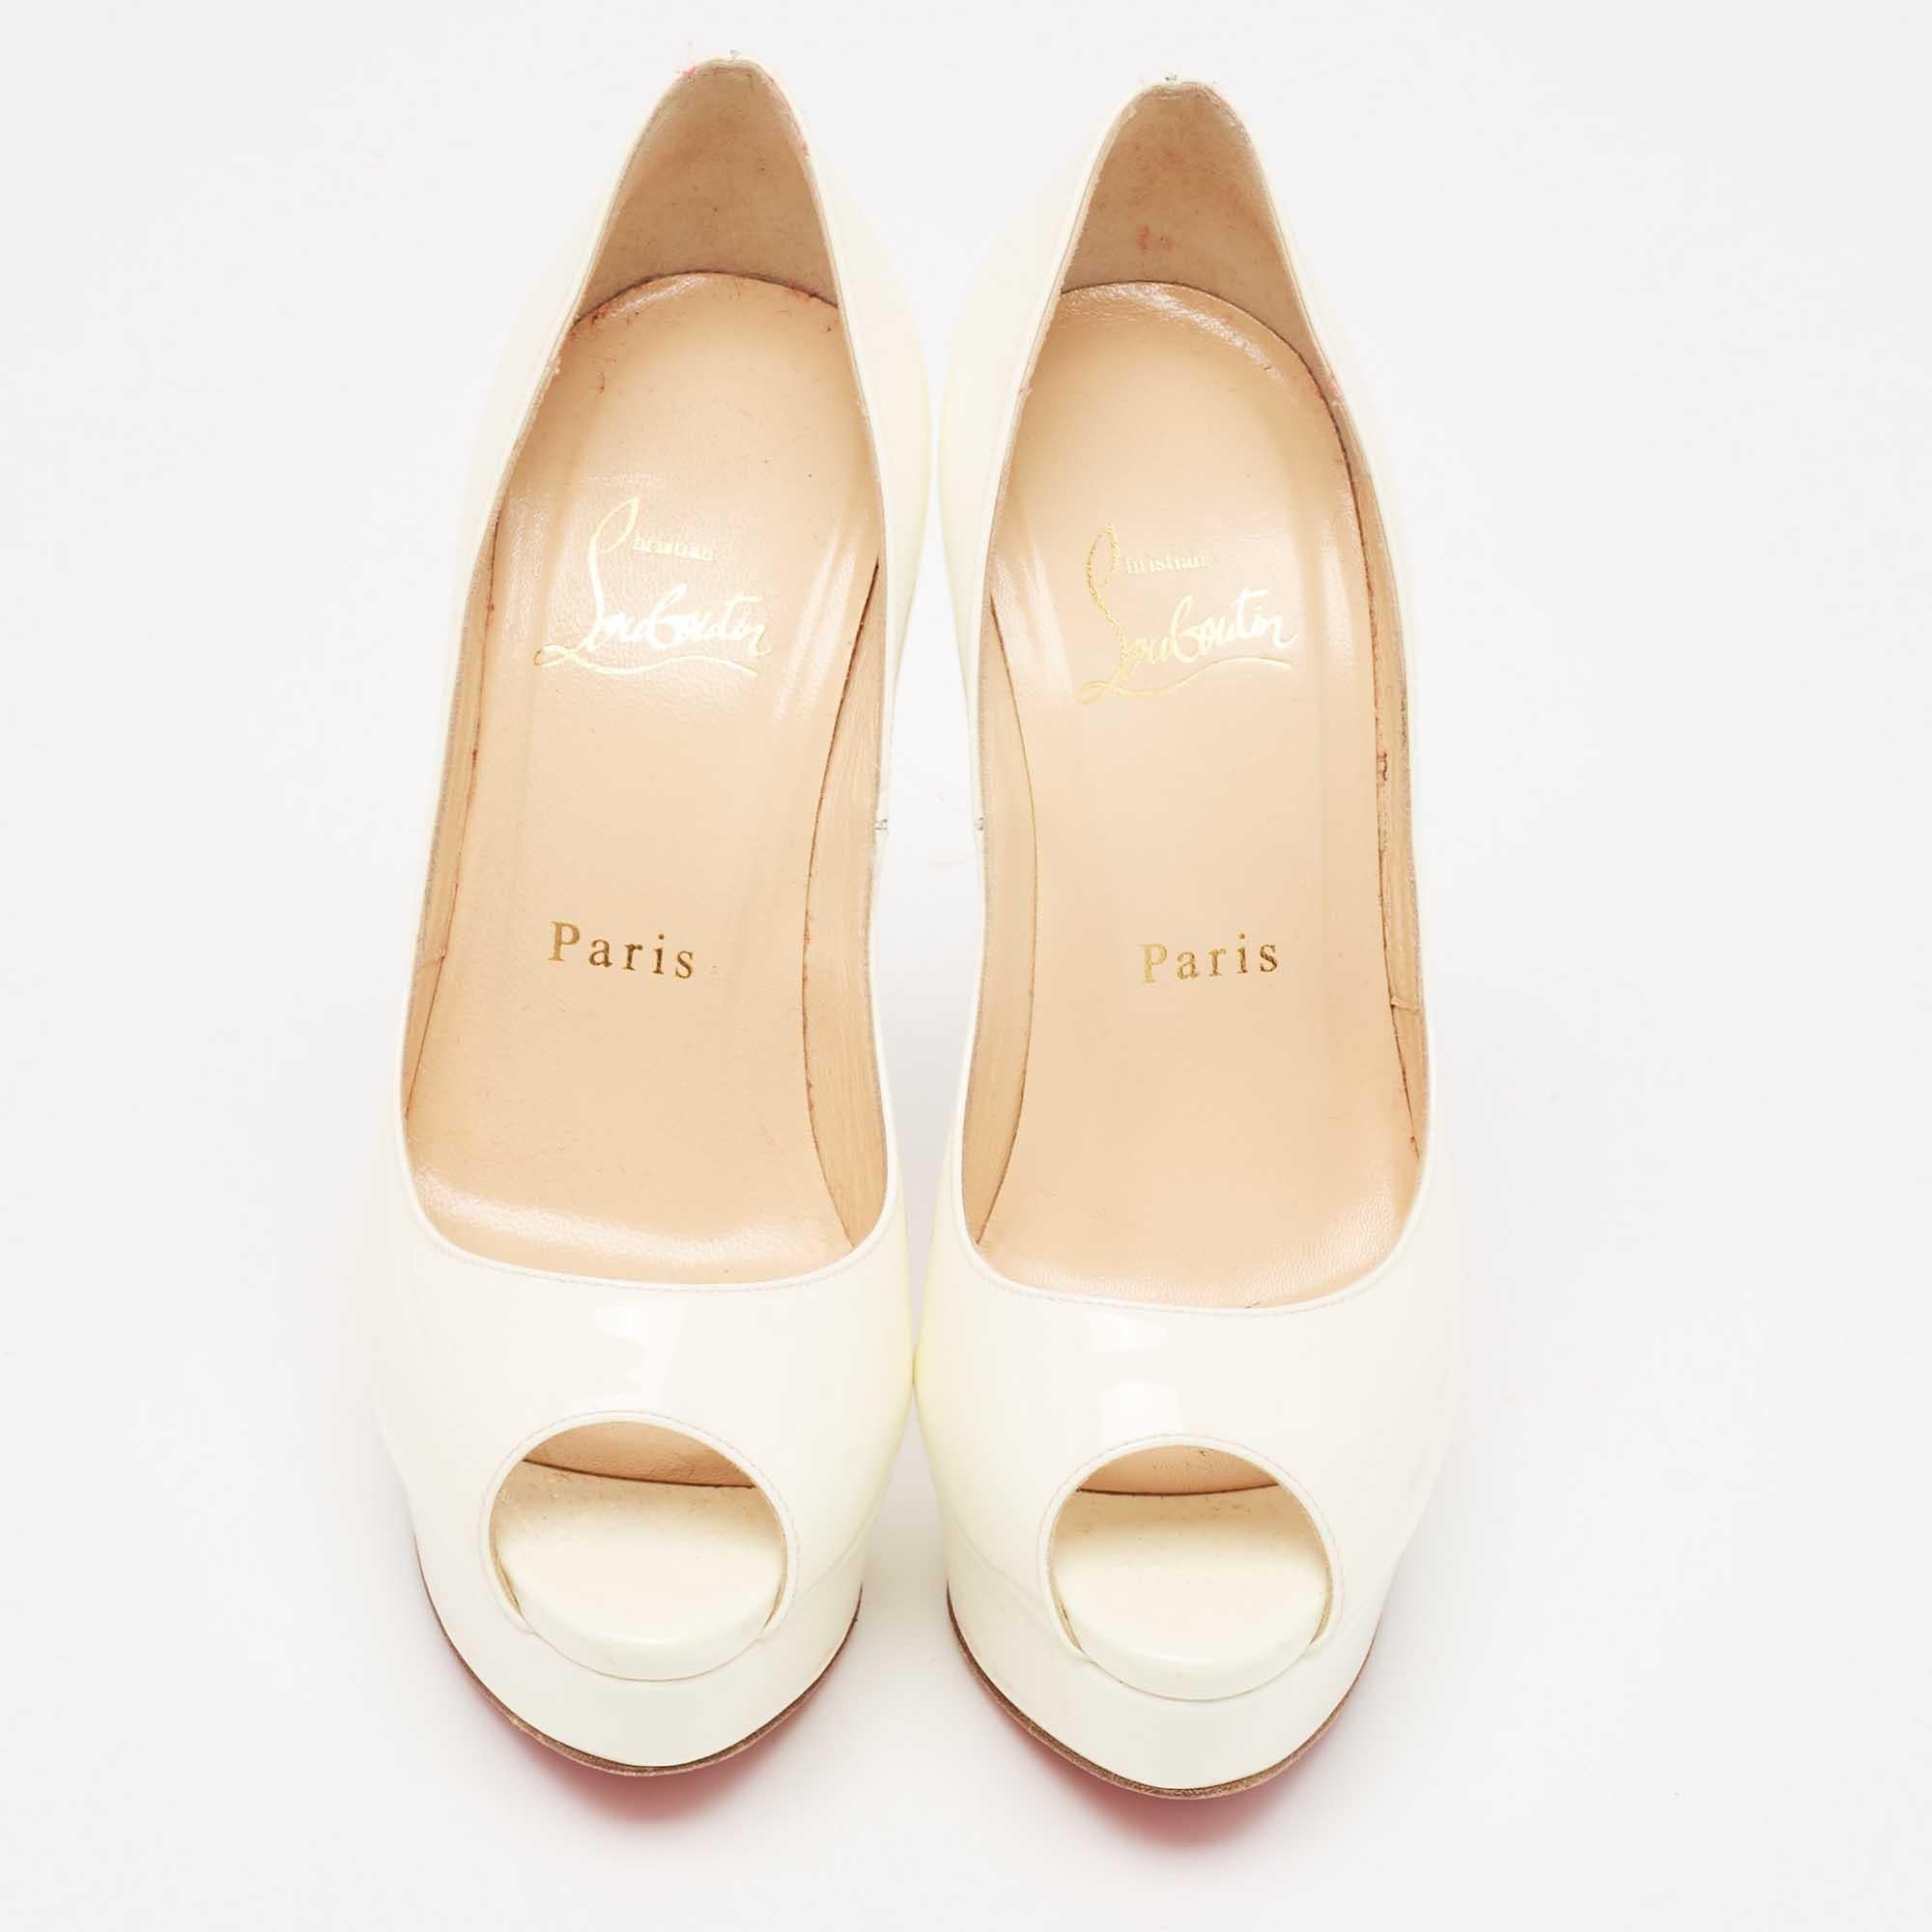 Stand out from the crowd with this luxurious pair of Louboutins that exude high fashion with class. Crafted from patent leather, this is a creation from their Lady Peep collection. It features a cream shade with peep toes and an architectural shape.